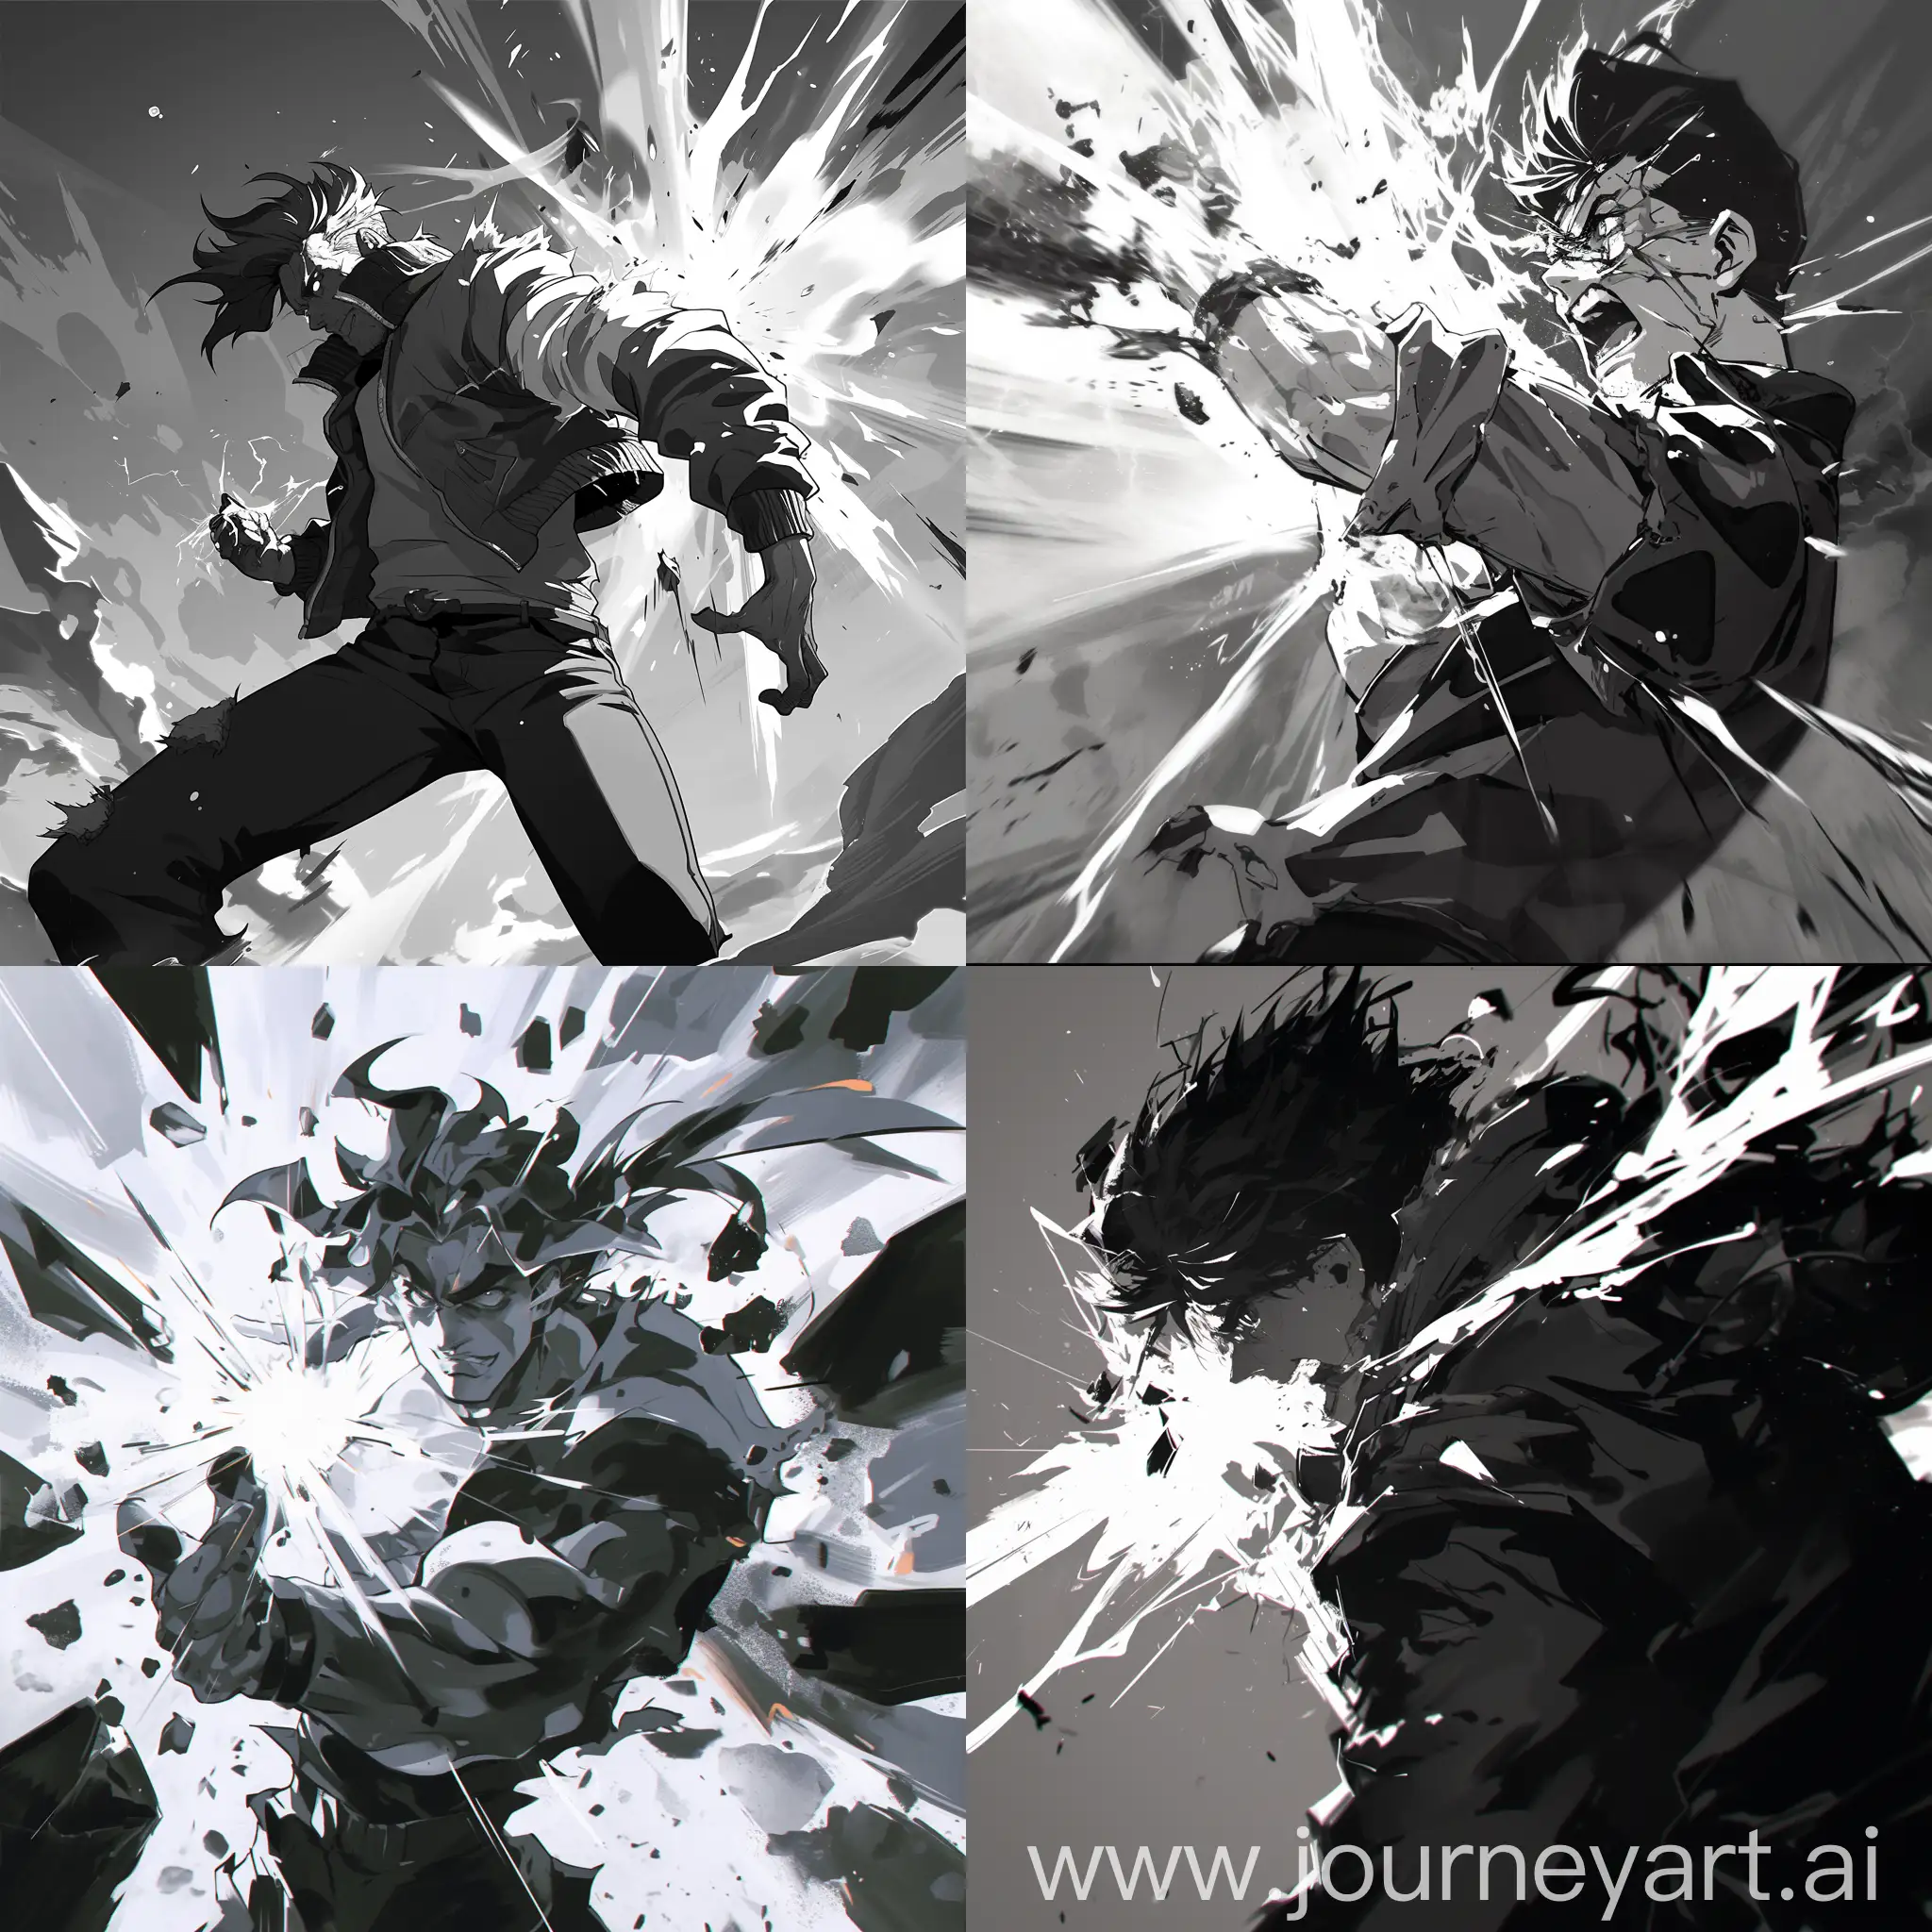 brutal man 90s anime style, Explosive effects, black and white filter, power --niji 6